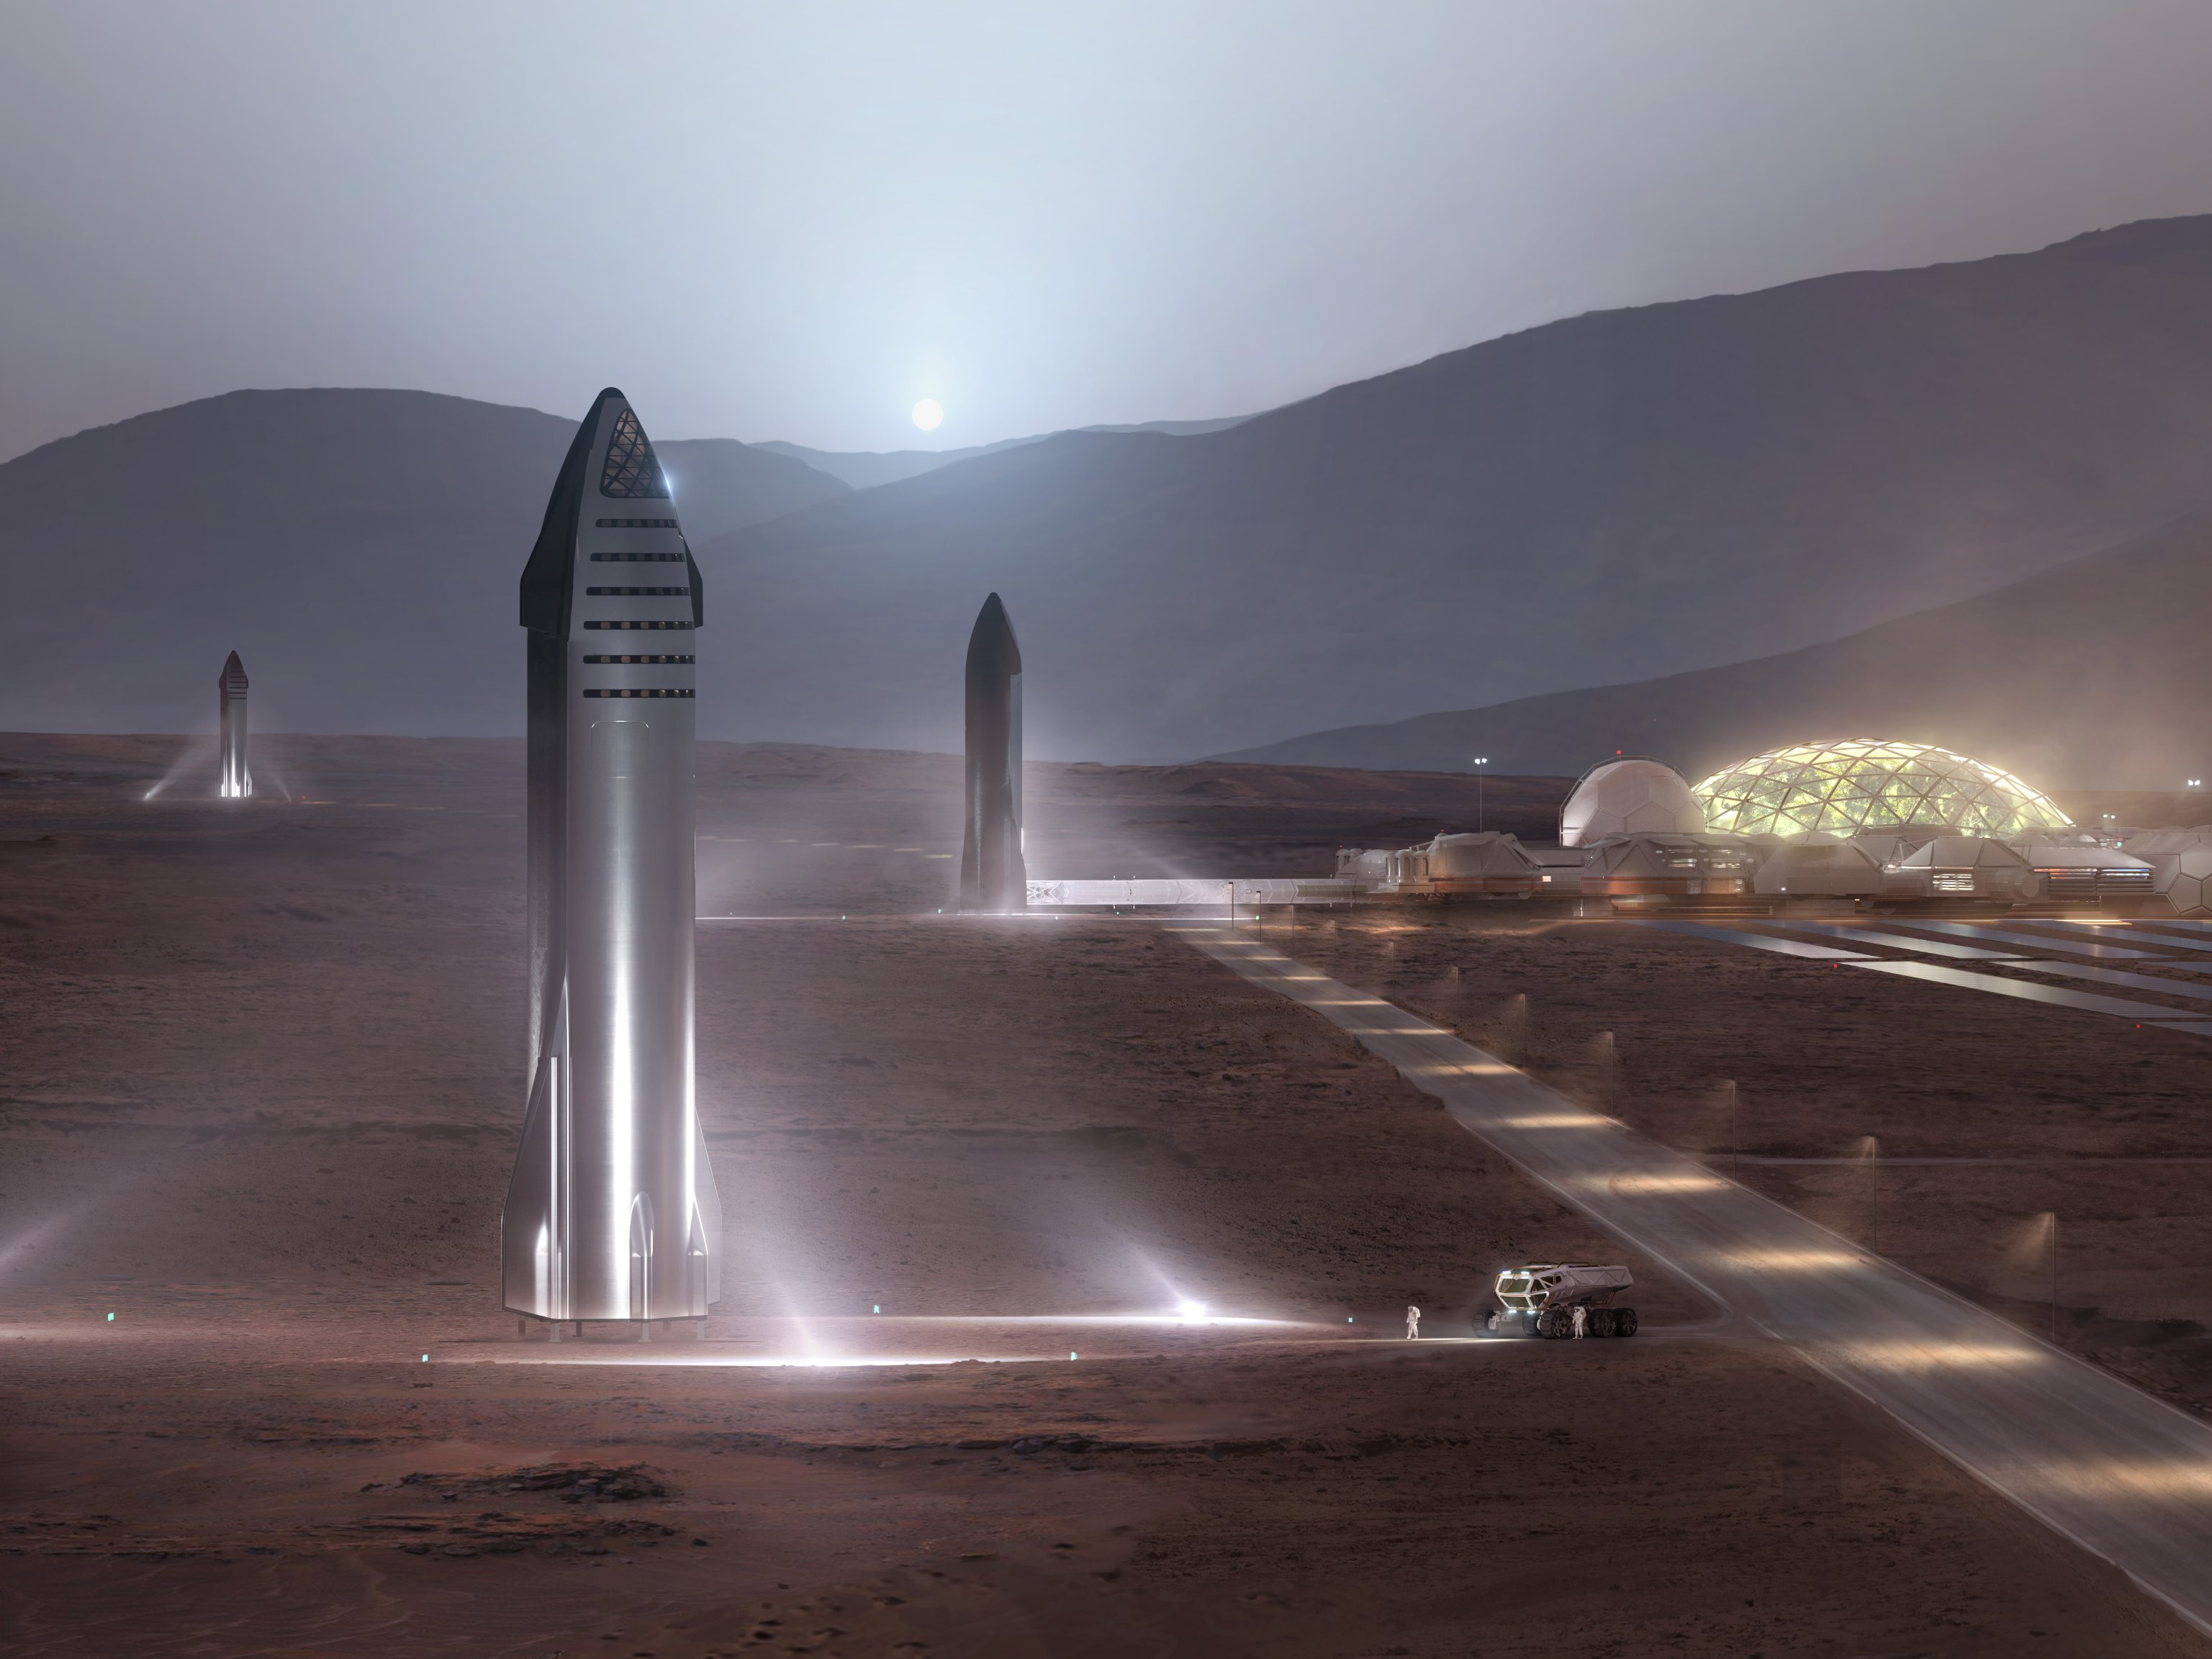 SpaceX Starship Economics Could Enable Making Life Multiplanetary, 'Full & Rapid Reusability Is The Holy Grail', says Elon Musk